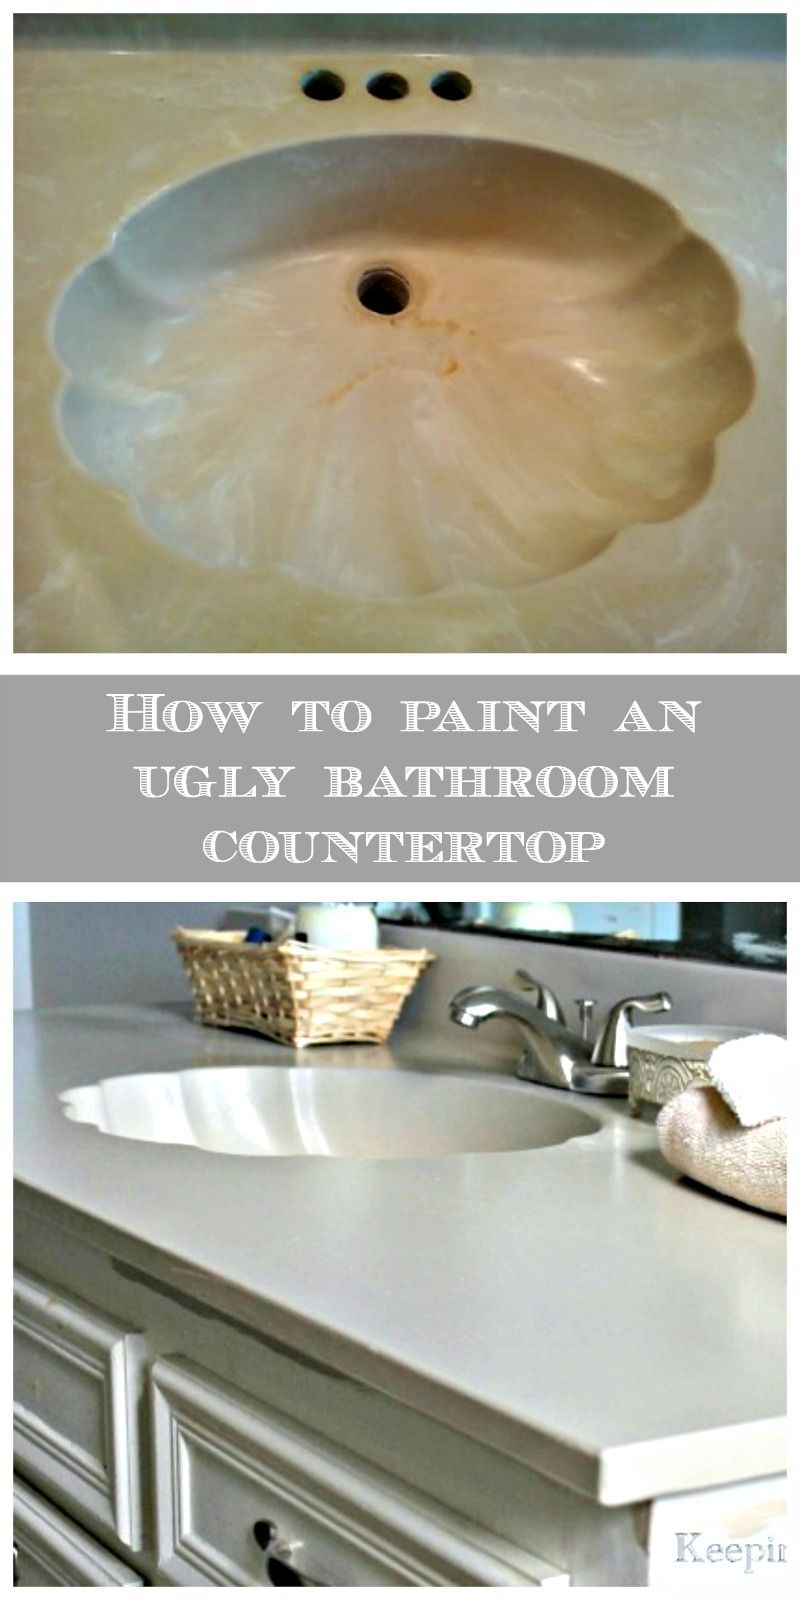 Transform an ugly bathroom countertop with paint!  I did this to our bathroom vanity in 2011 and the finish is still as tough and